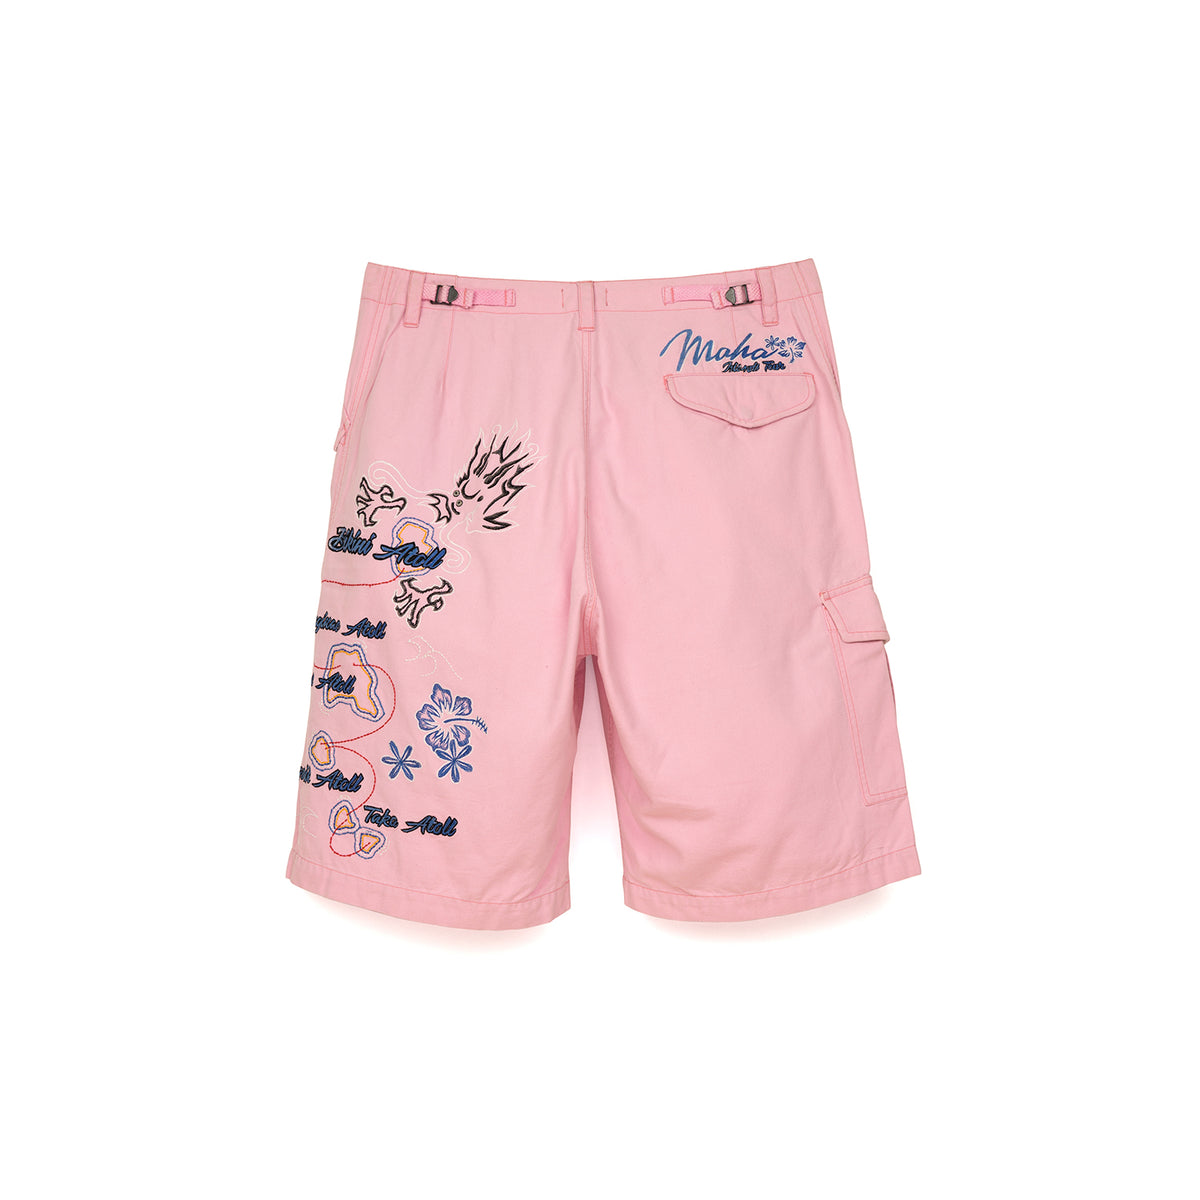 maharishi Miltype Cargo Snoshorts Islands Tour Embroidery Coral Pink - Concrete